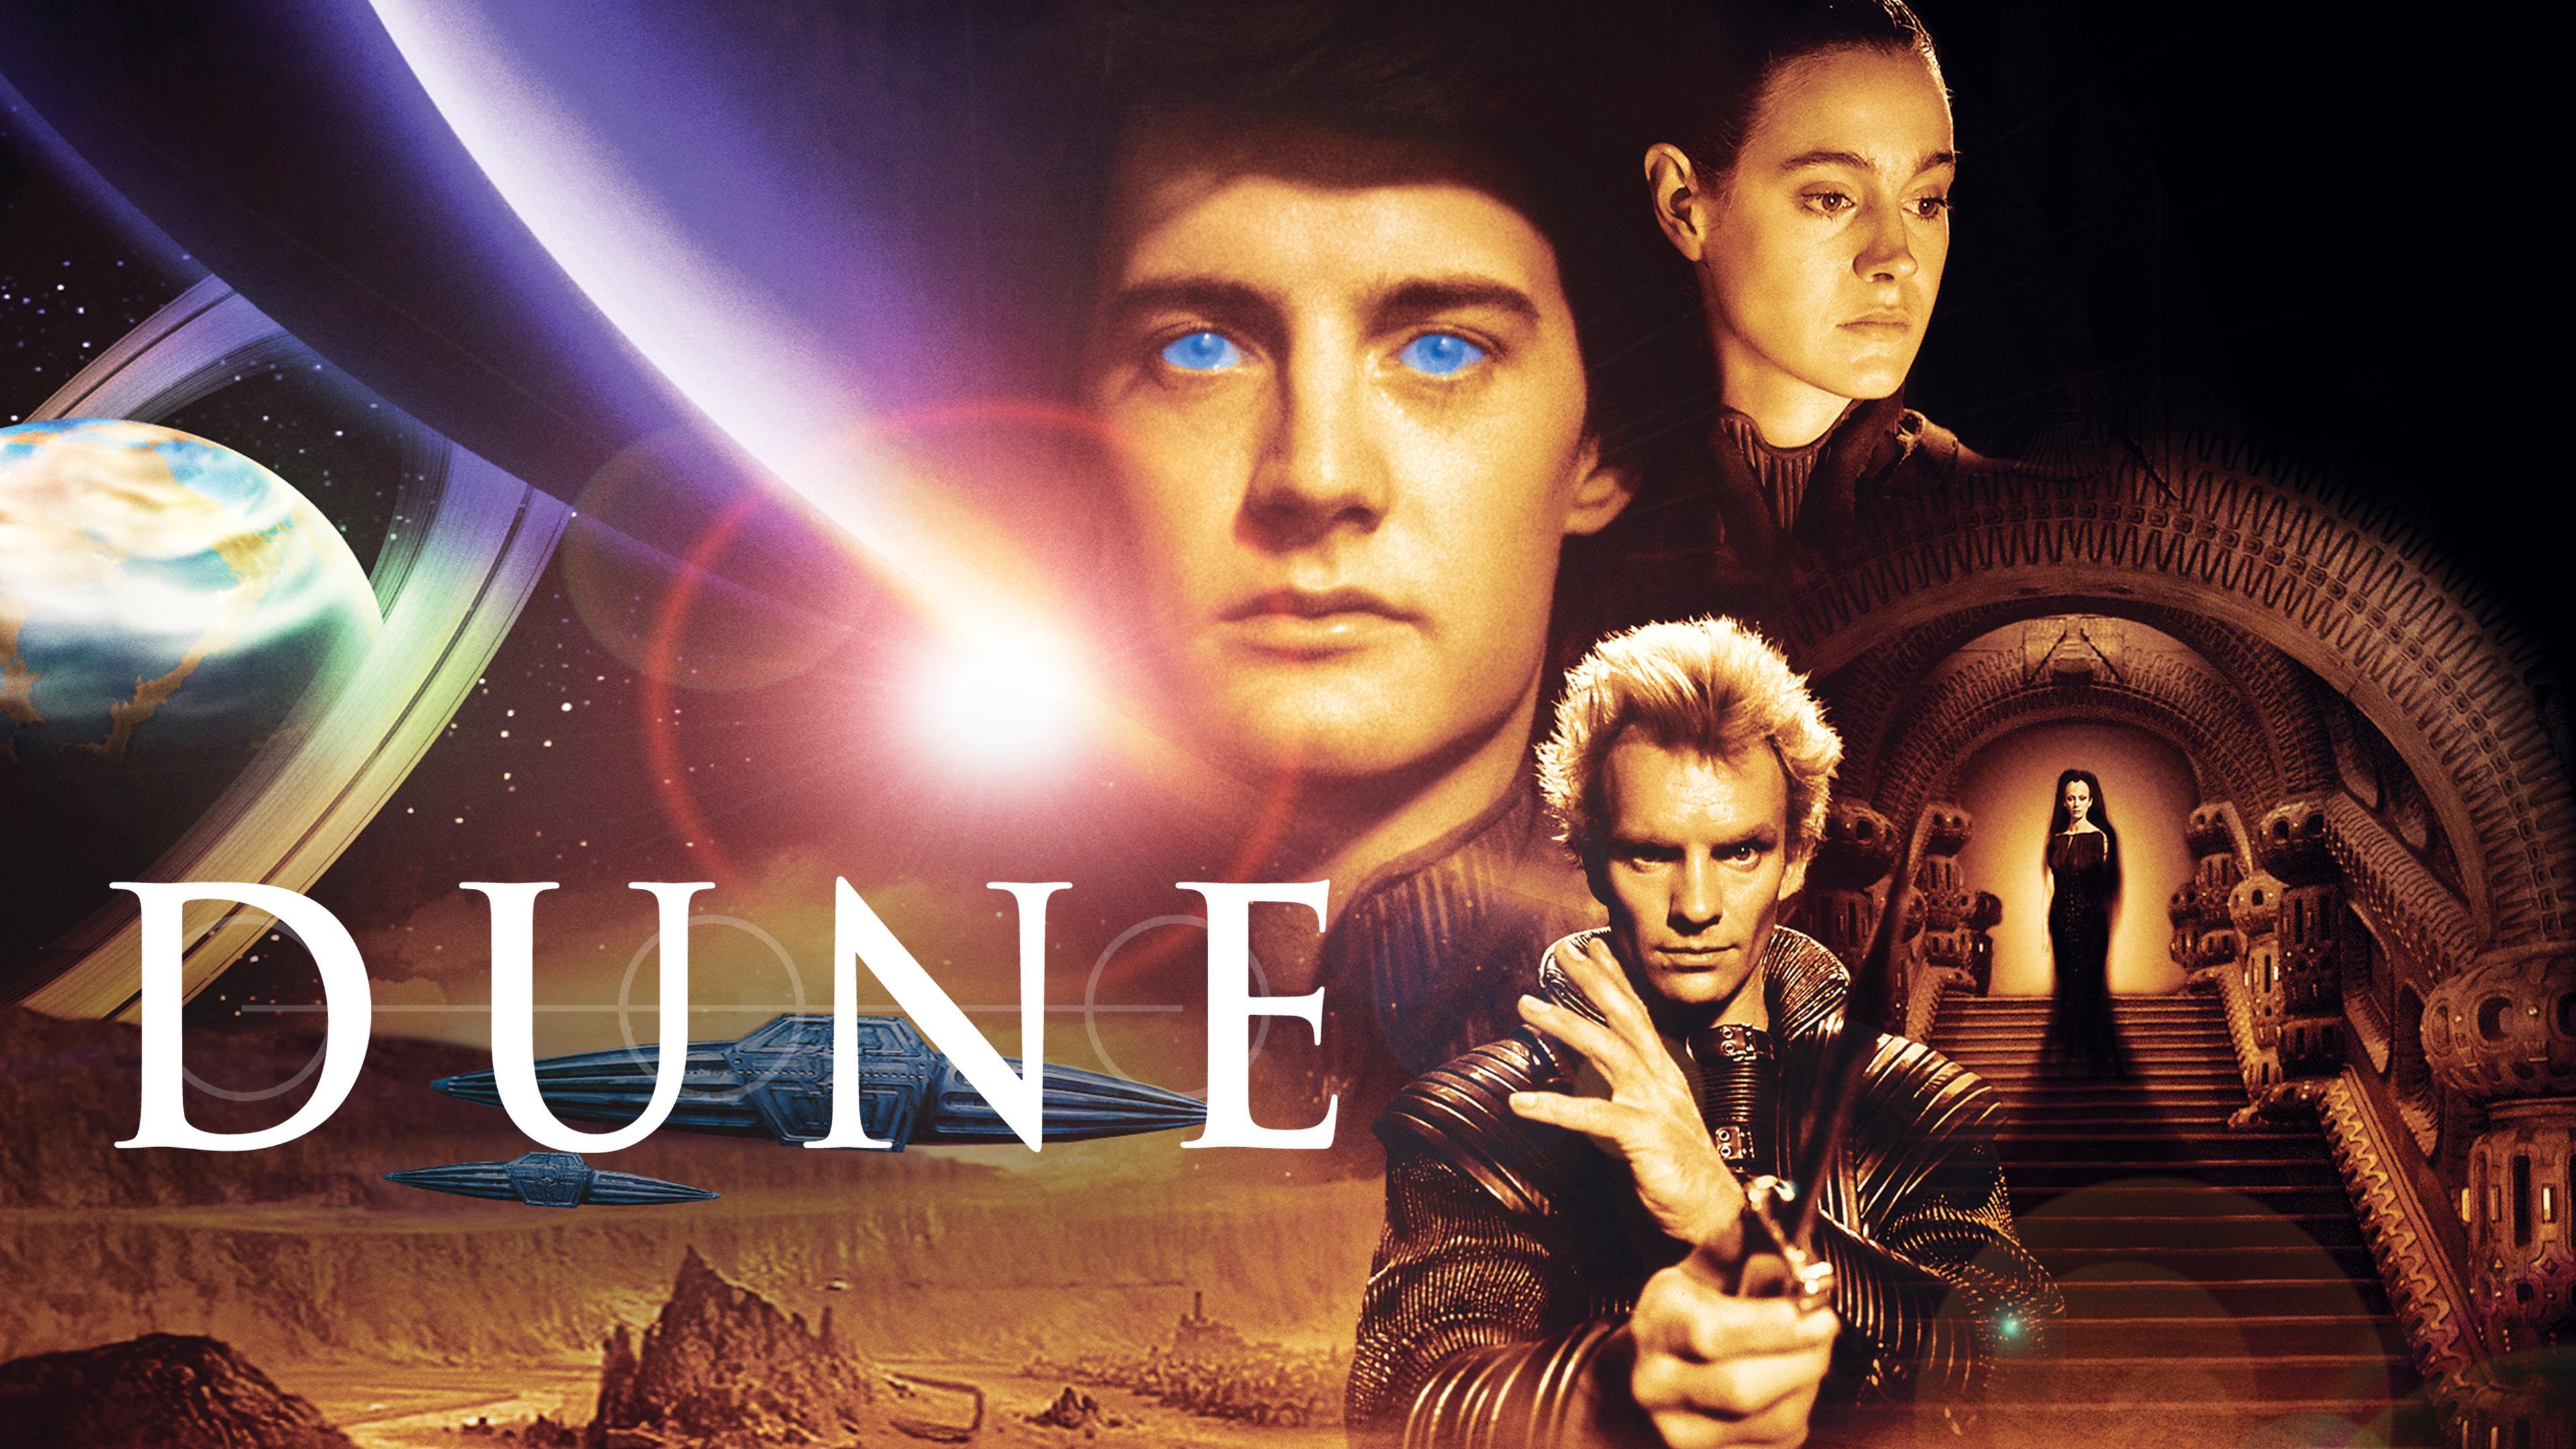 planets in the movie dune